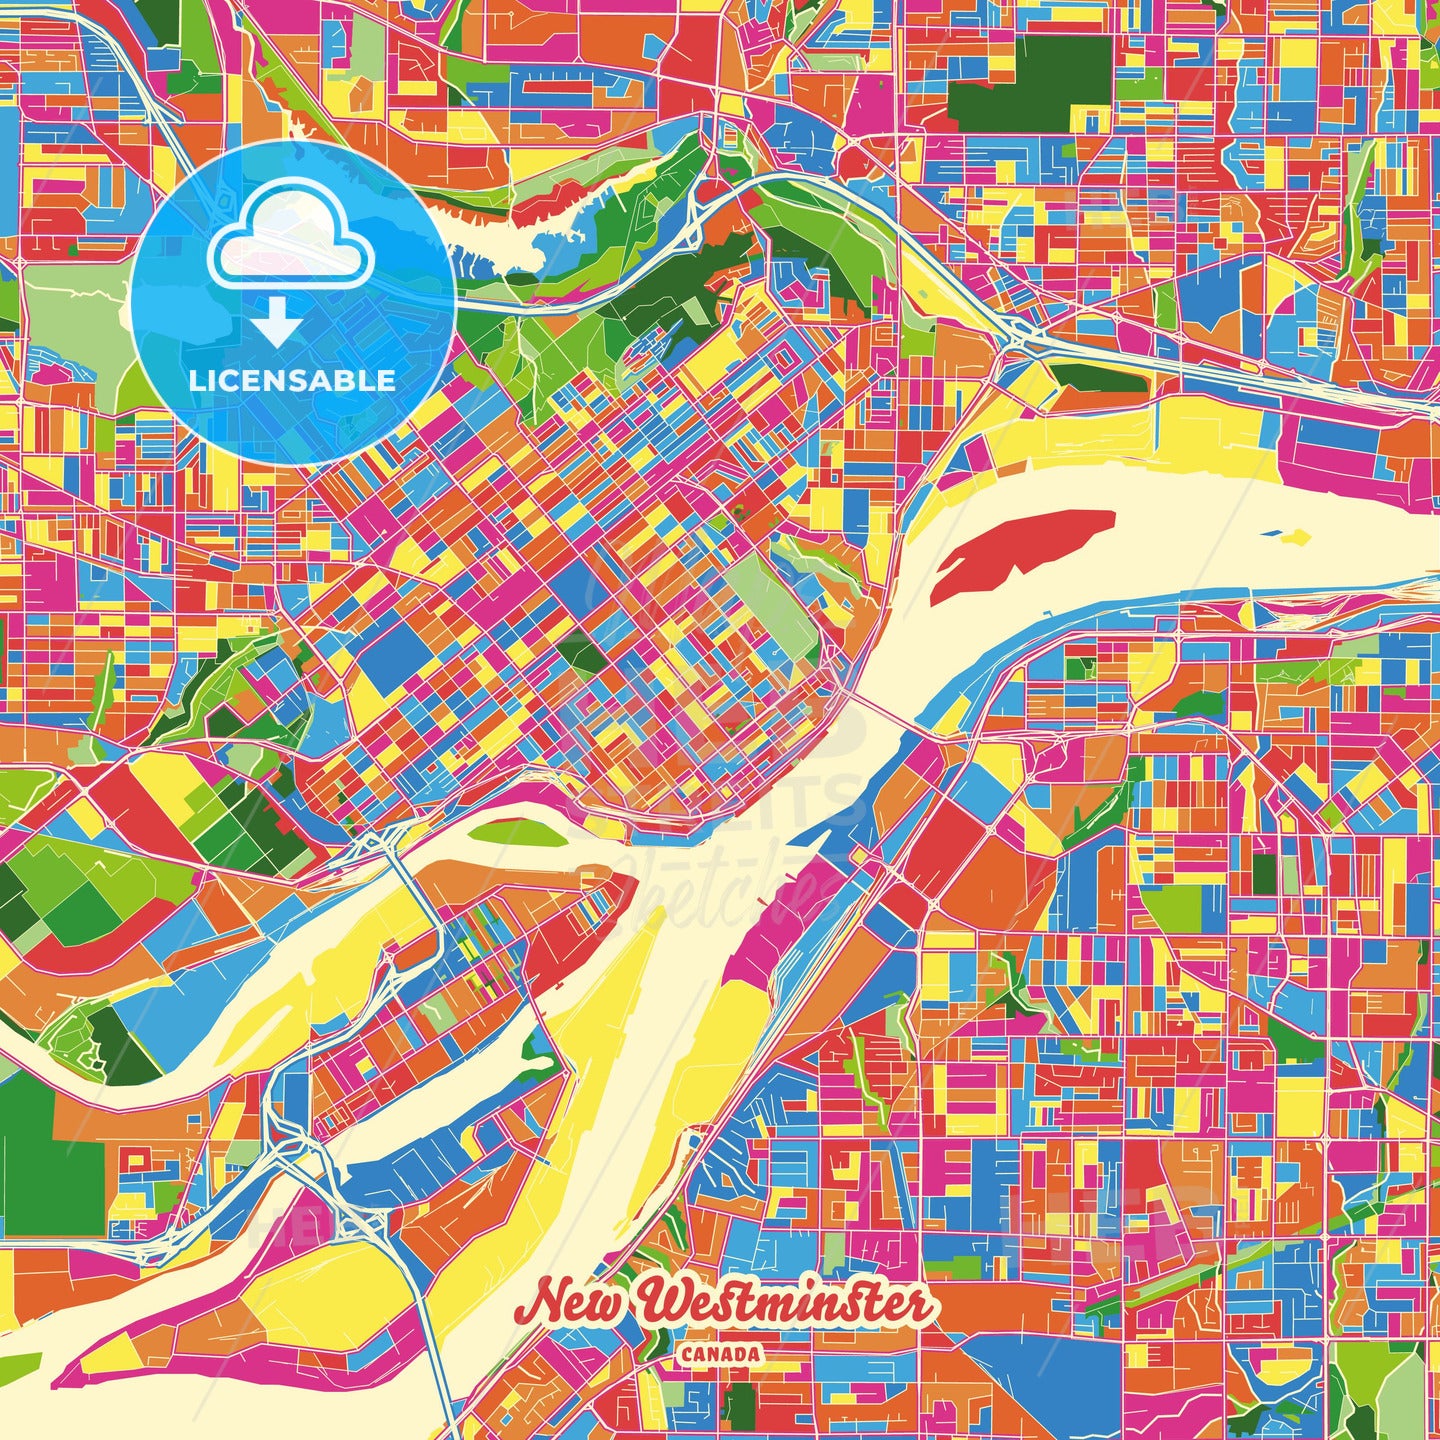 New Westminster, Canada Crazy Colorful Street Map Poster Template - HEBSTREITS Sketches